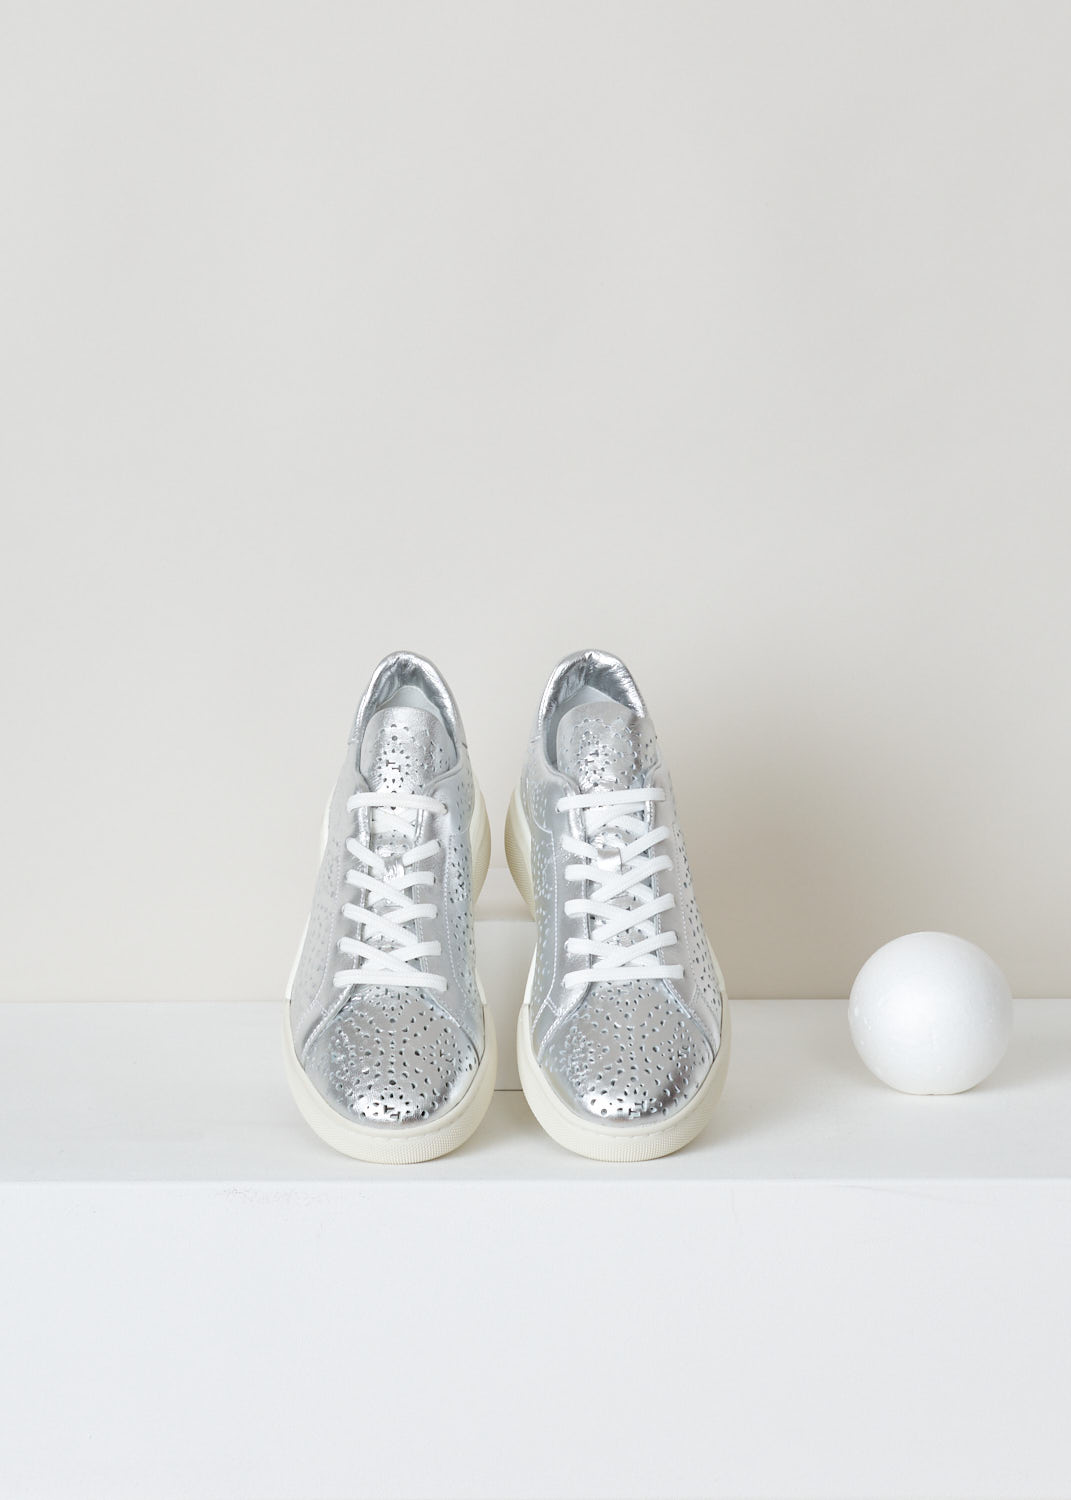 Tods, Silver coloured laser-cut sneakers, XXW31C0CU10MTZB200_argento, silver, top. Silver coloured sneakers, tooled with a laser to get all these lovely shapes cut out. All leather on the inside with a rubber sole. 